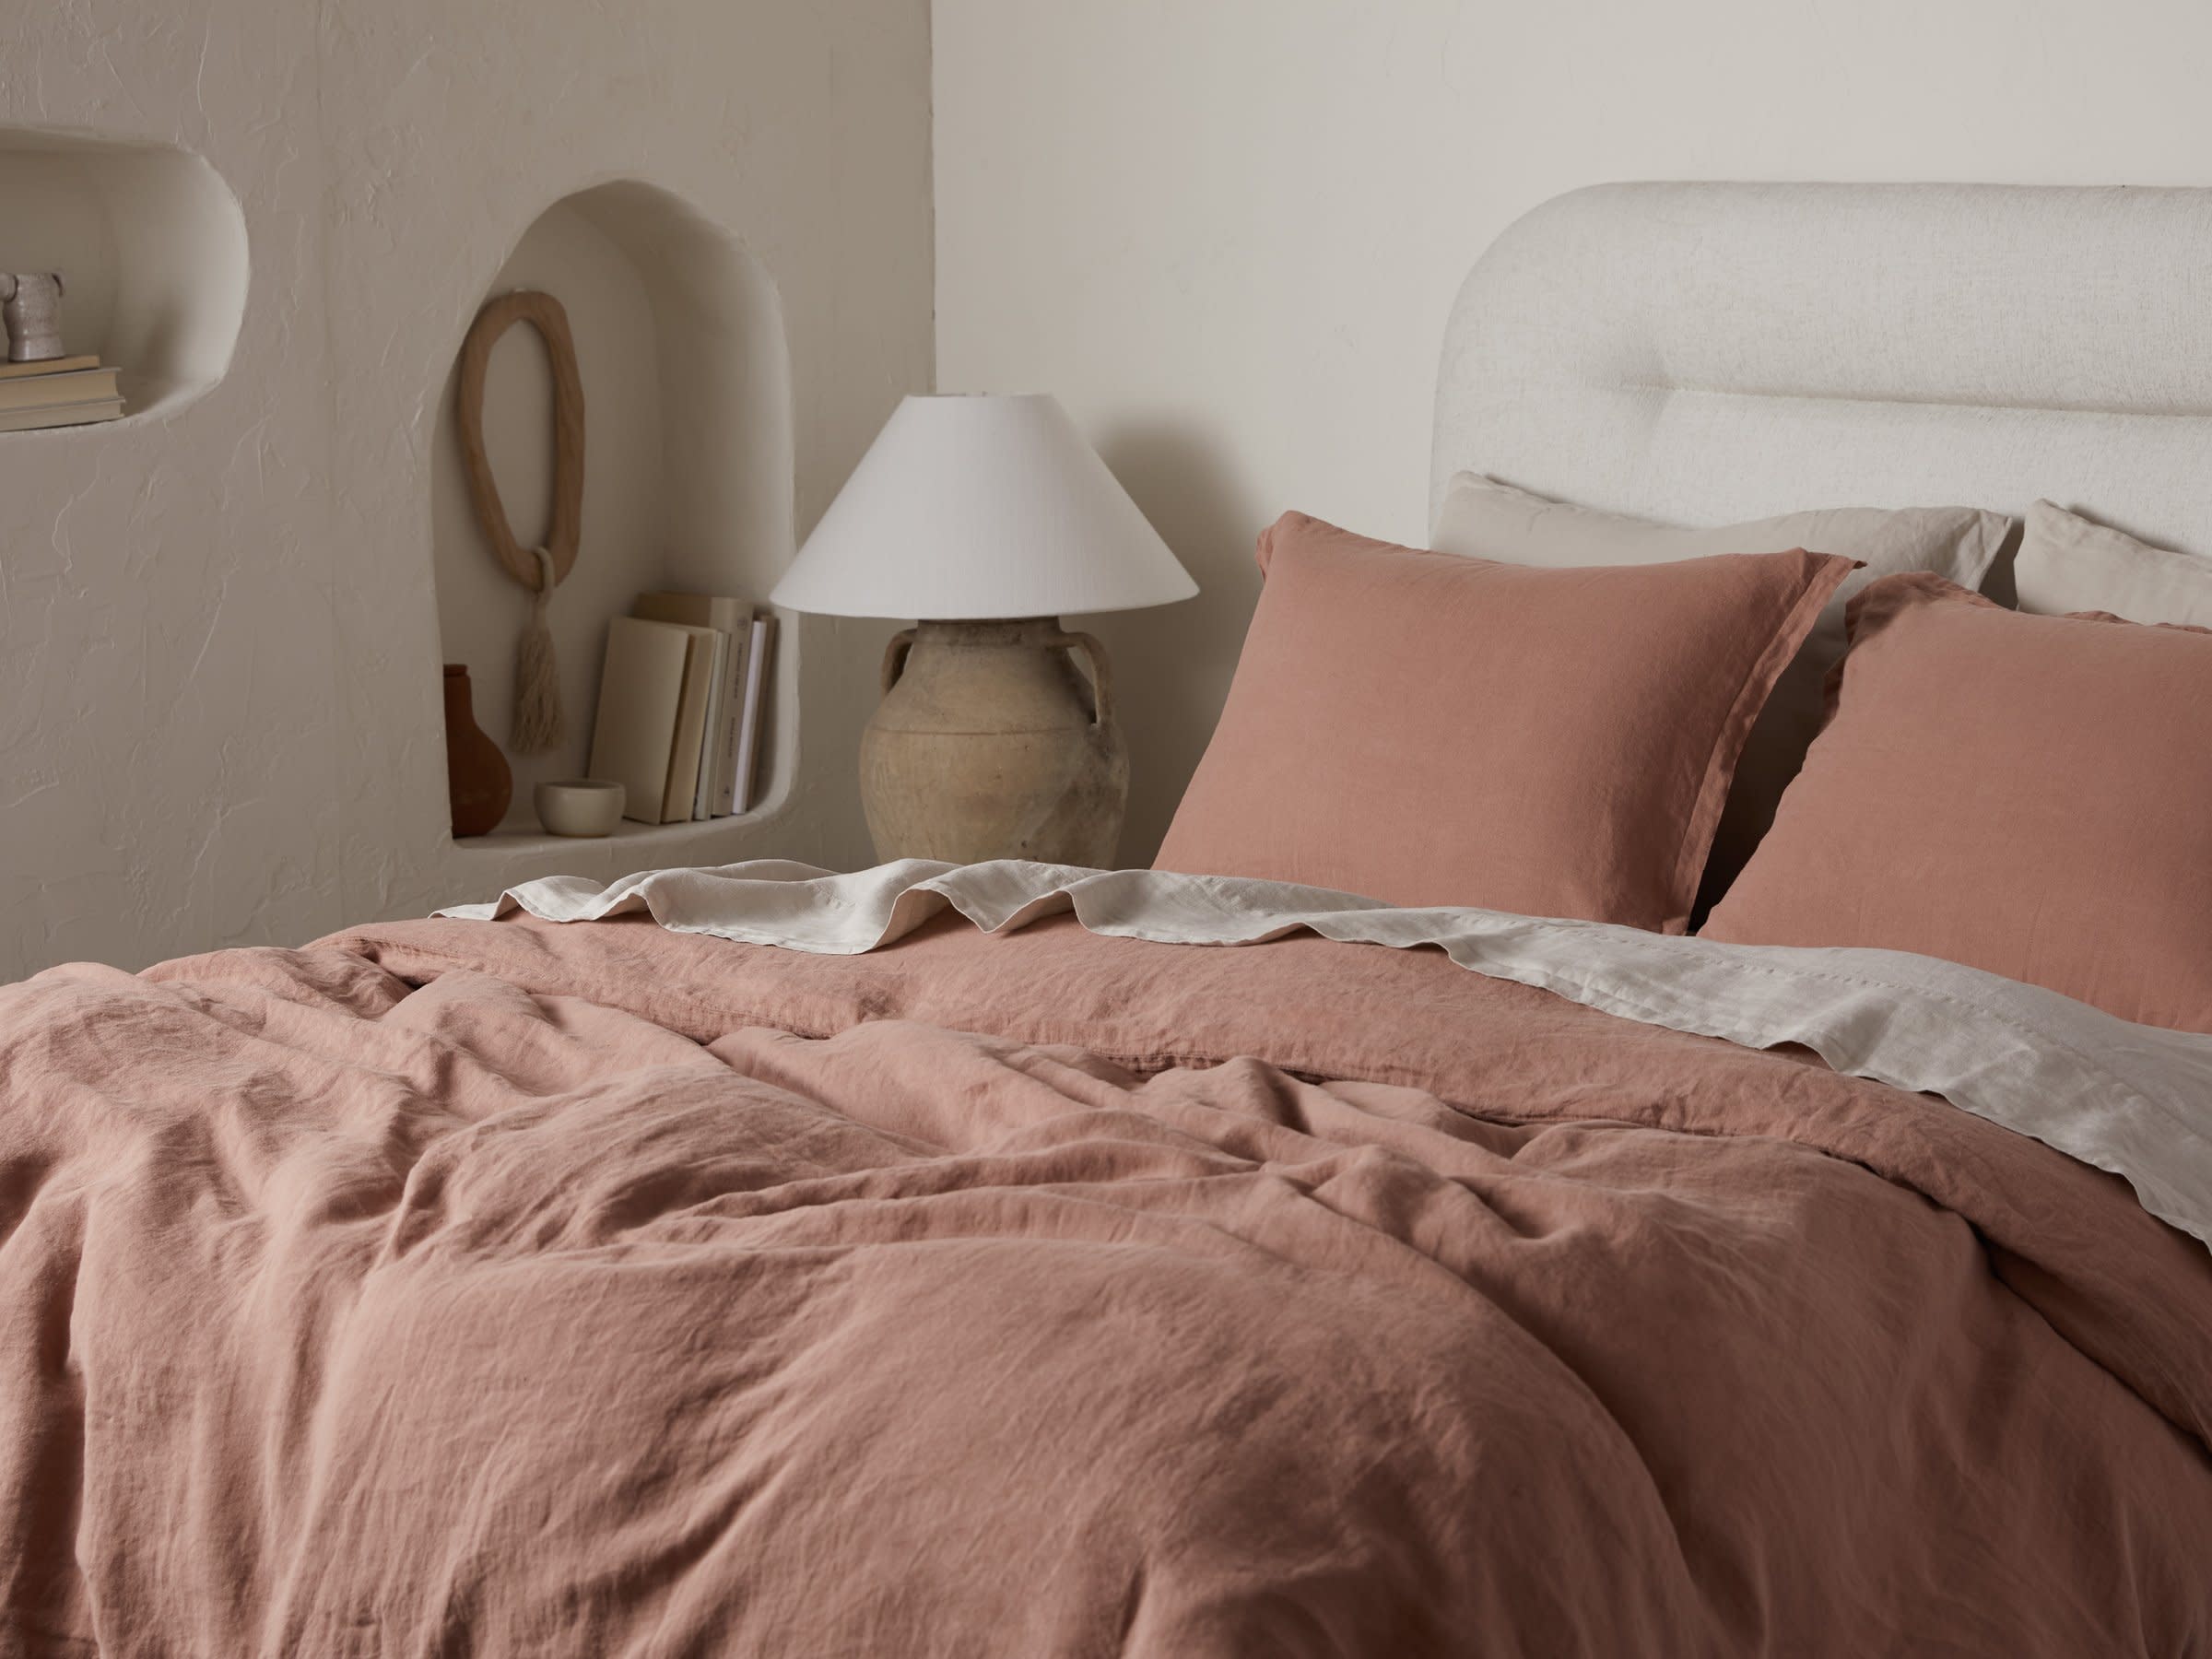 Clay Linen Duvet Cover Shown In A Room